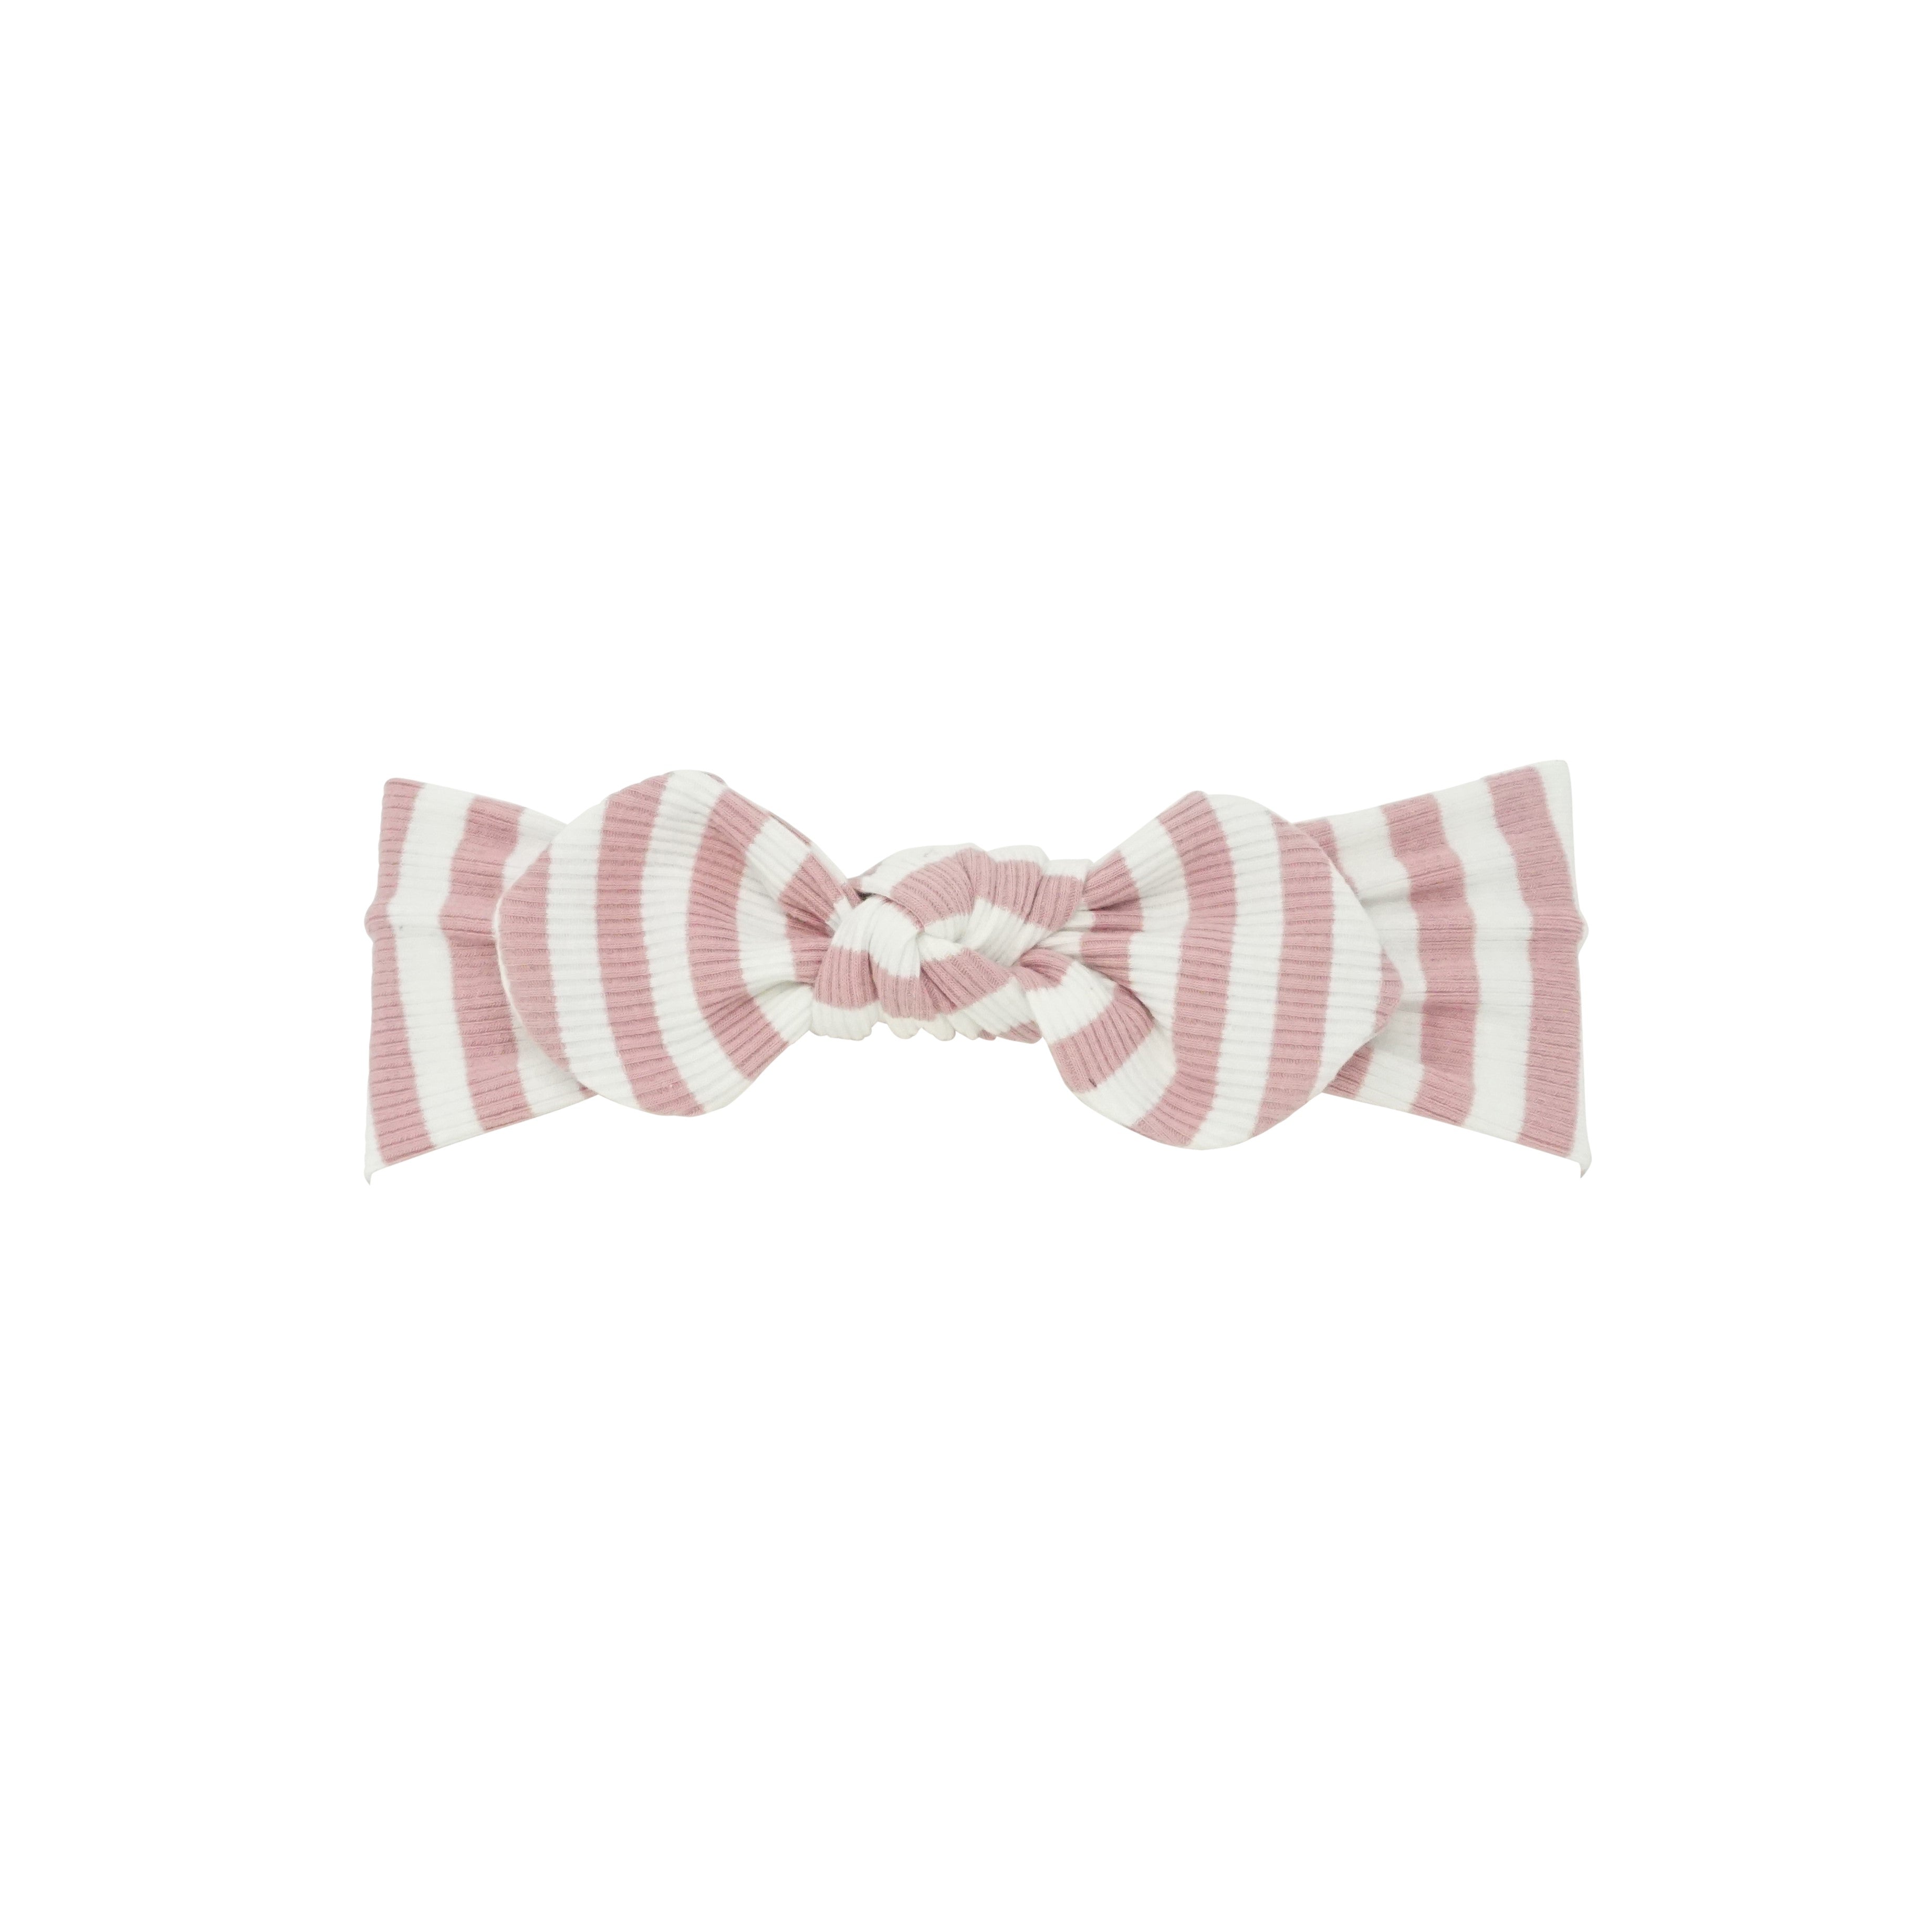 Ribbed Striped Baby Band